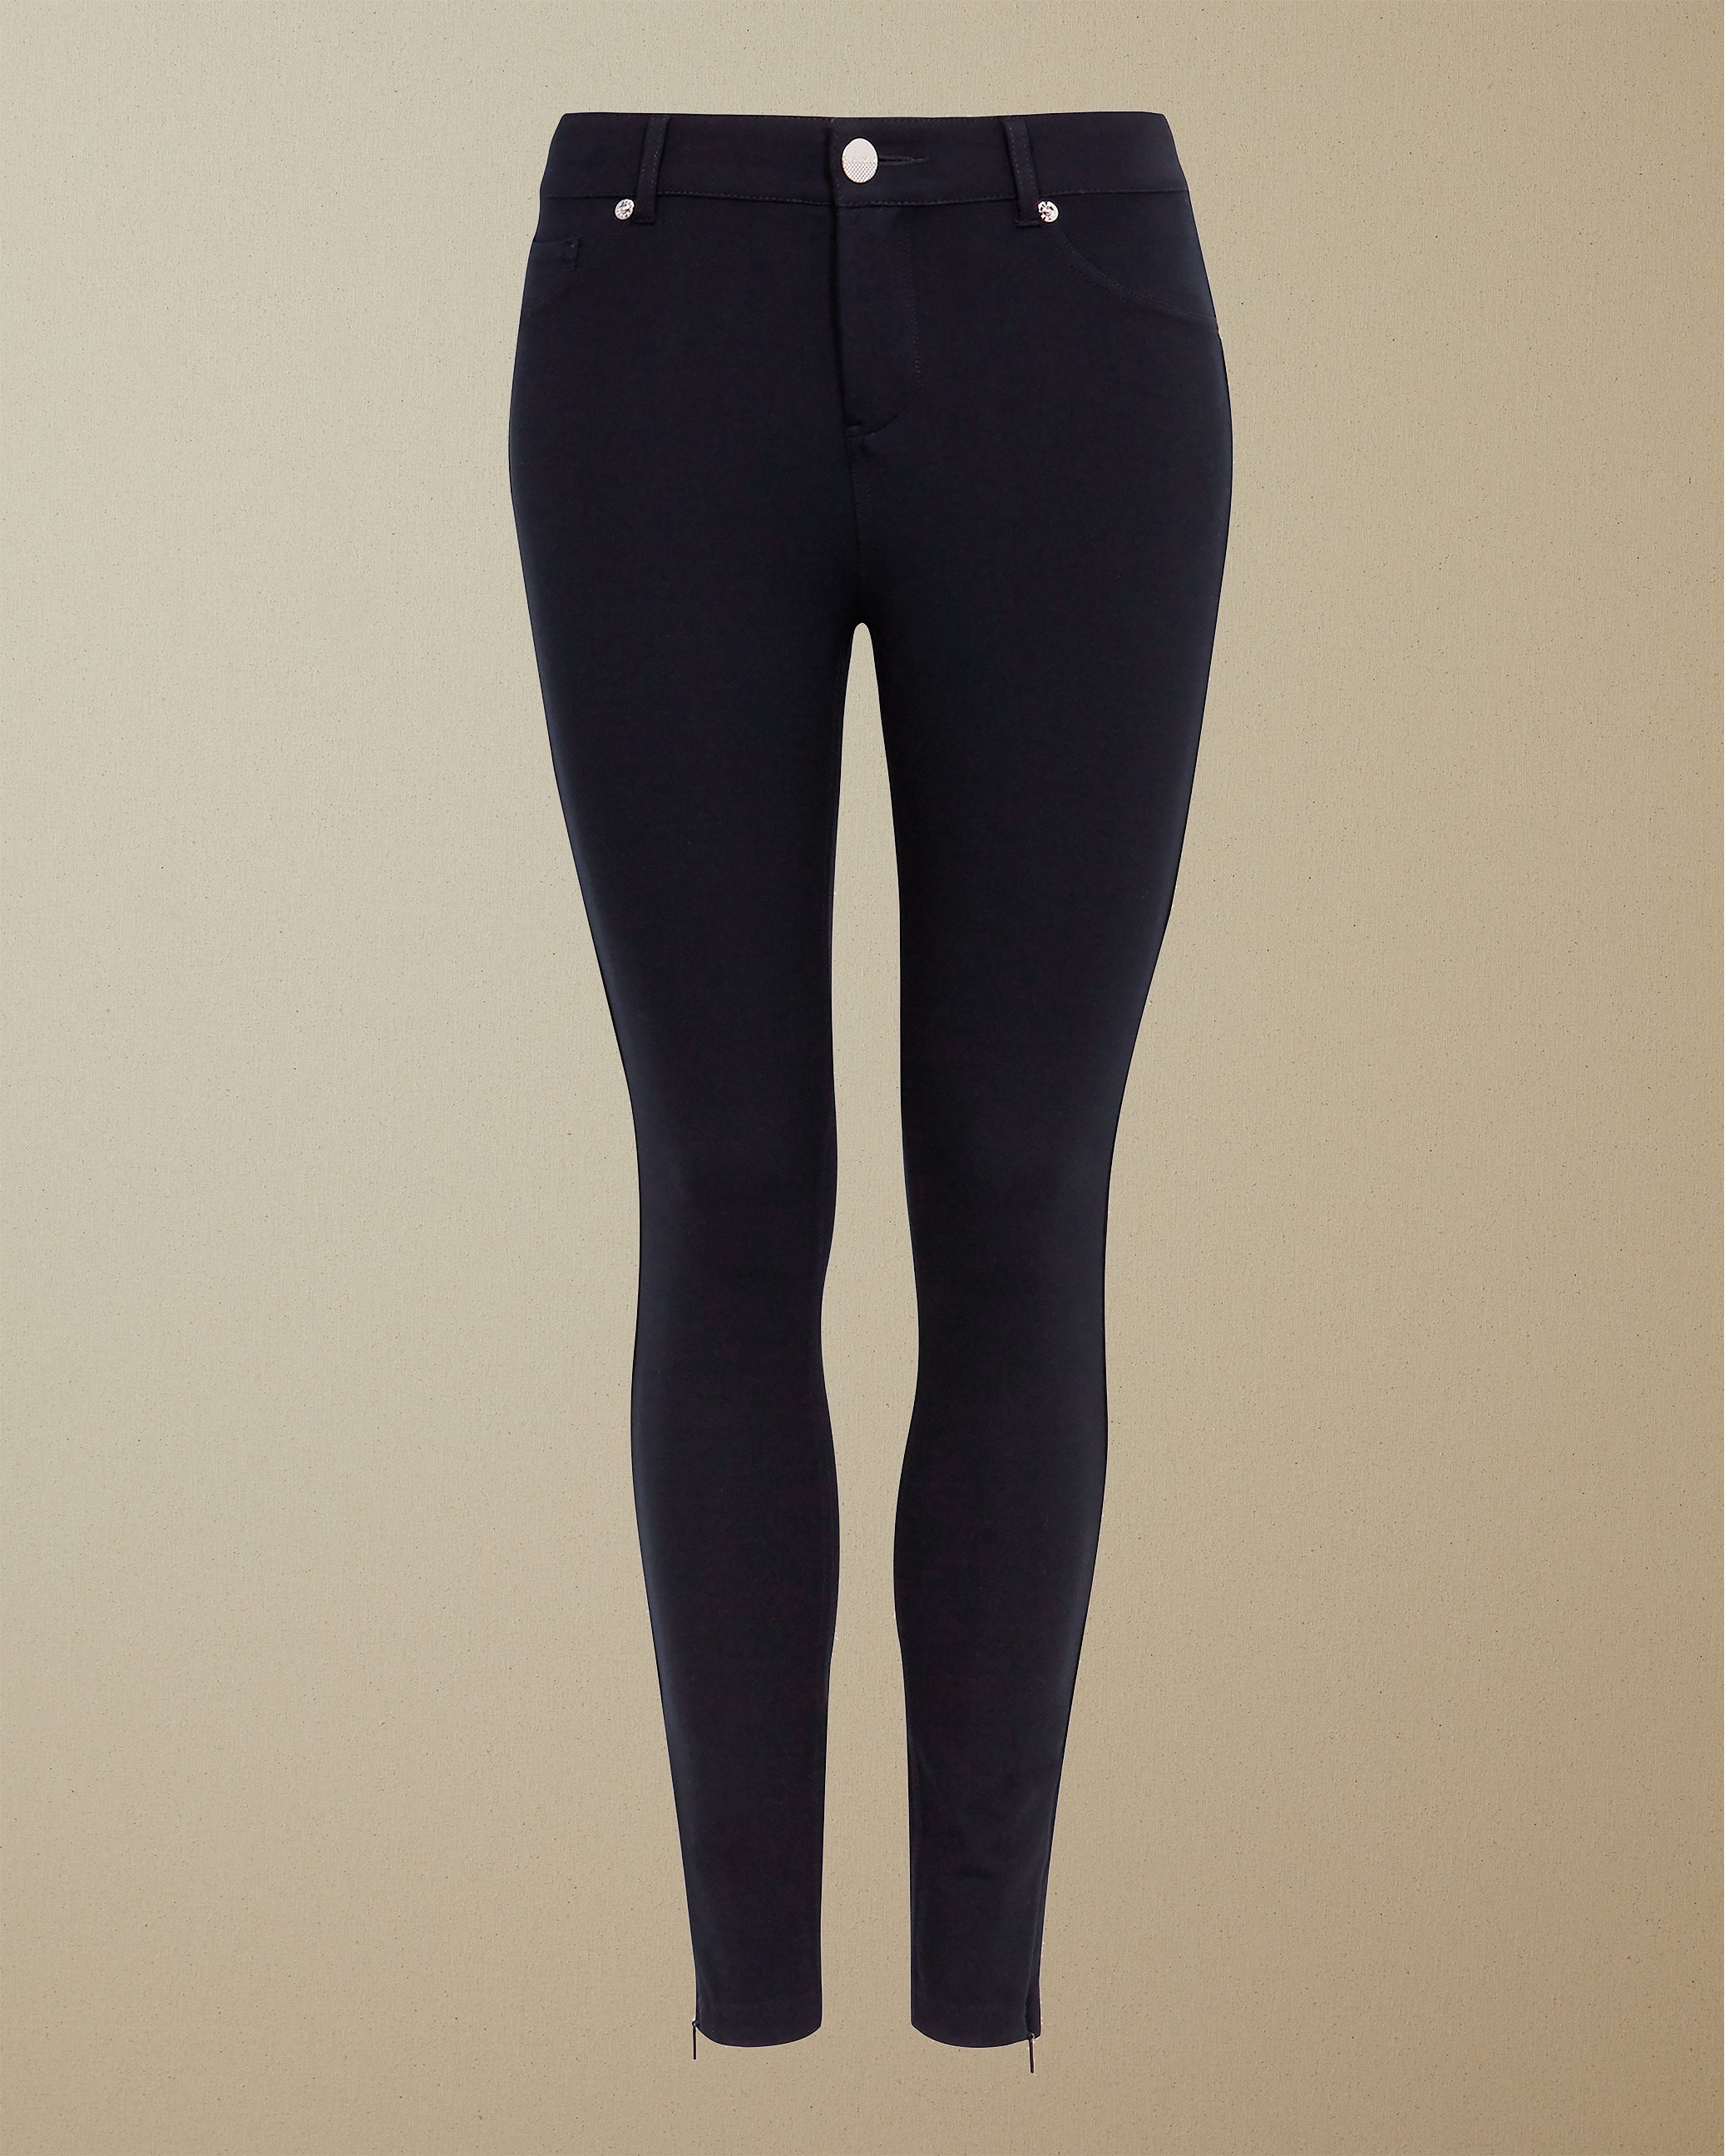 Women's Pants & Shorts – Ted Baker, United States